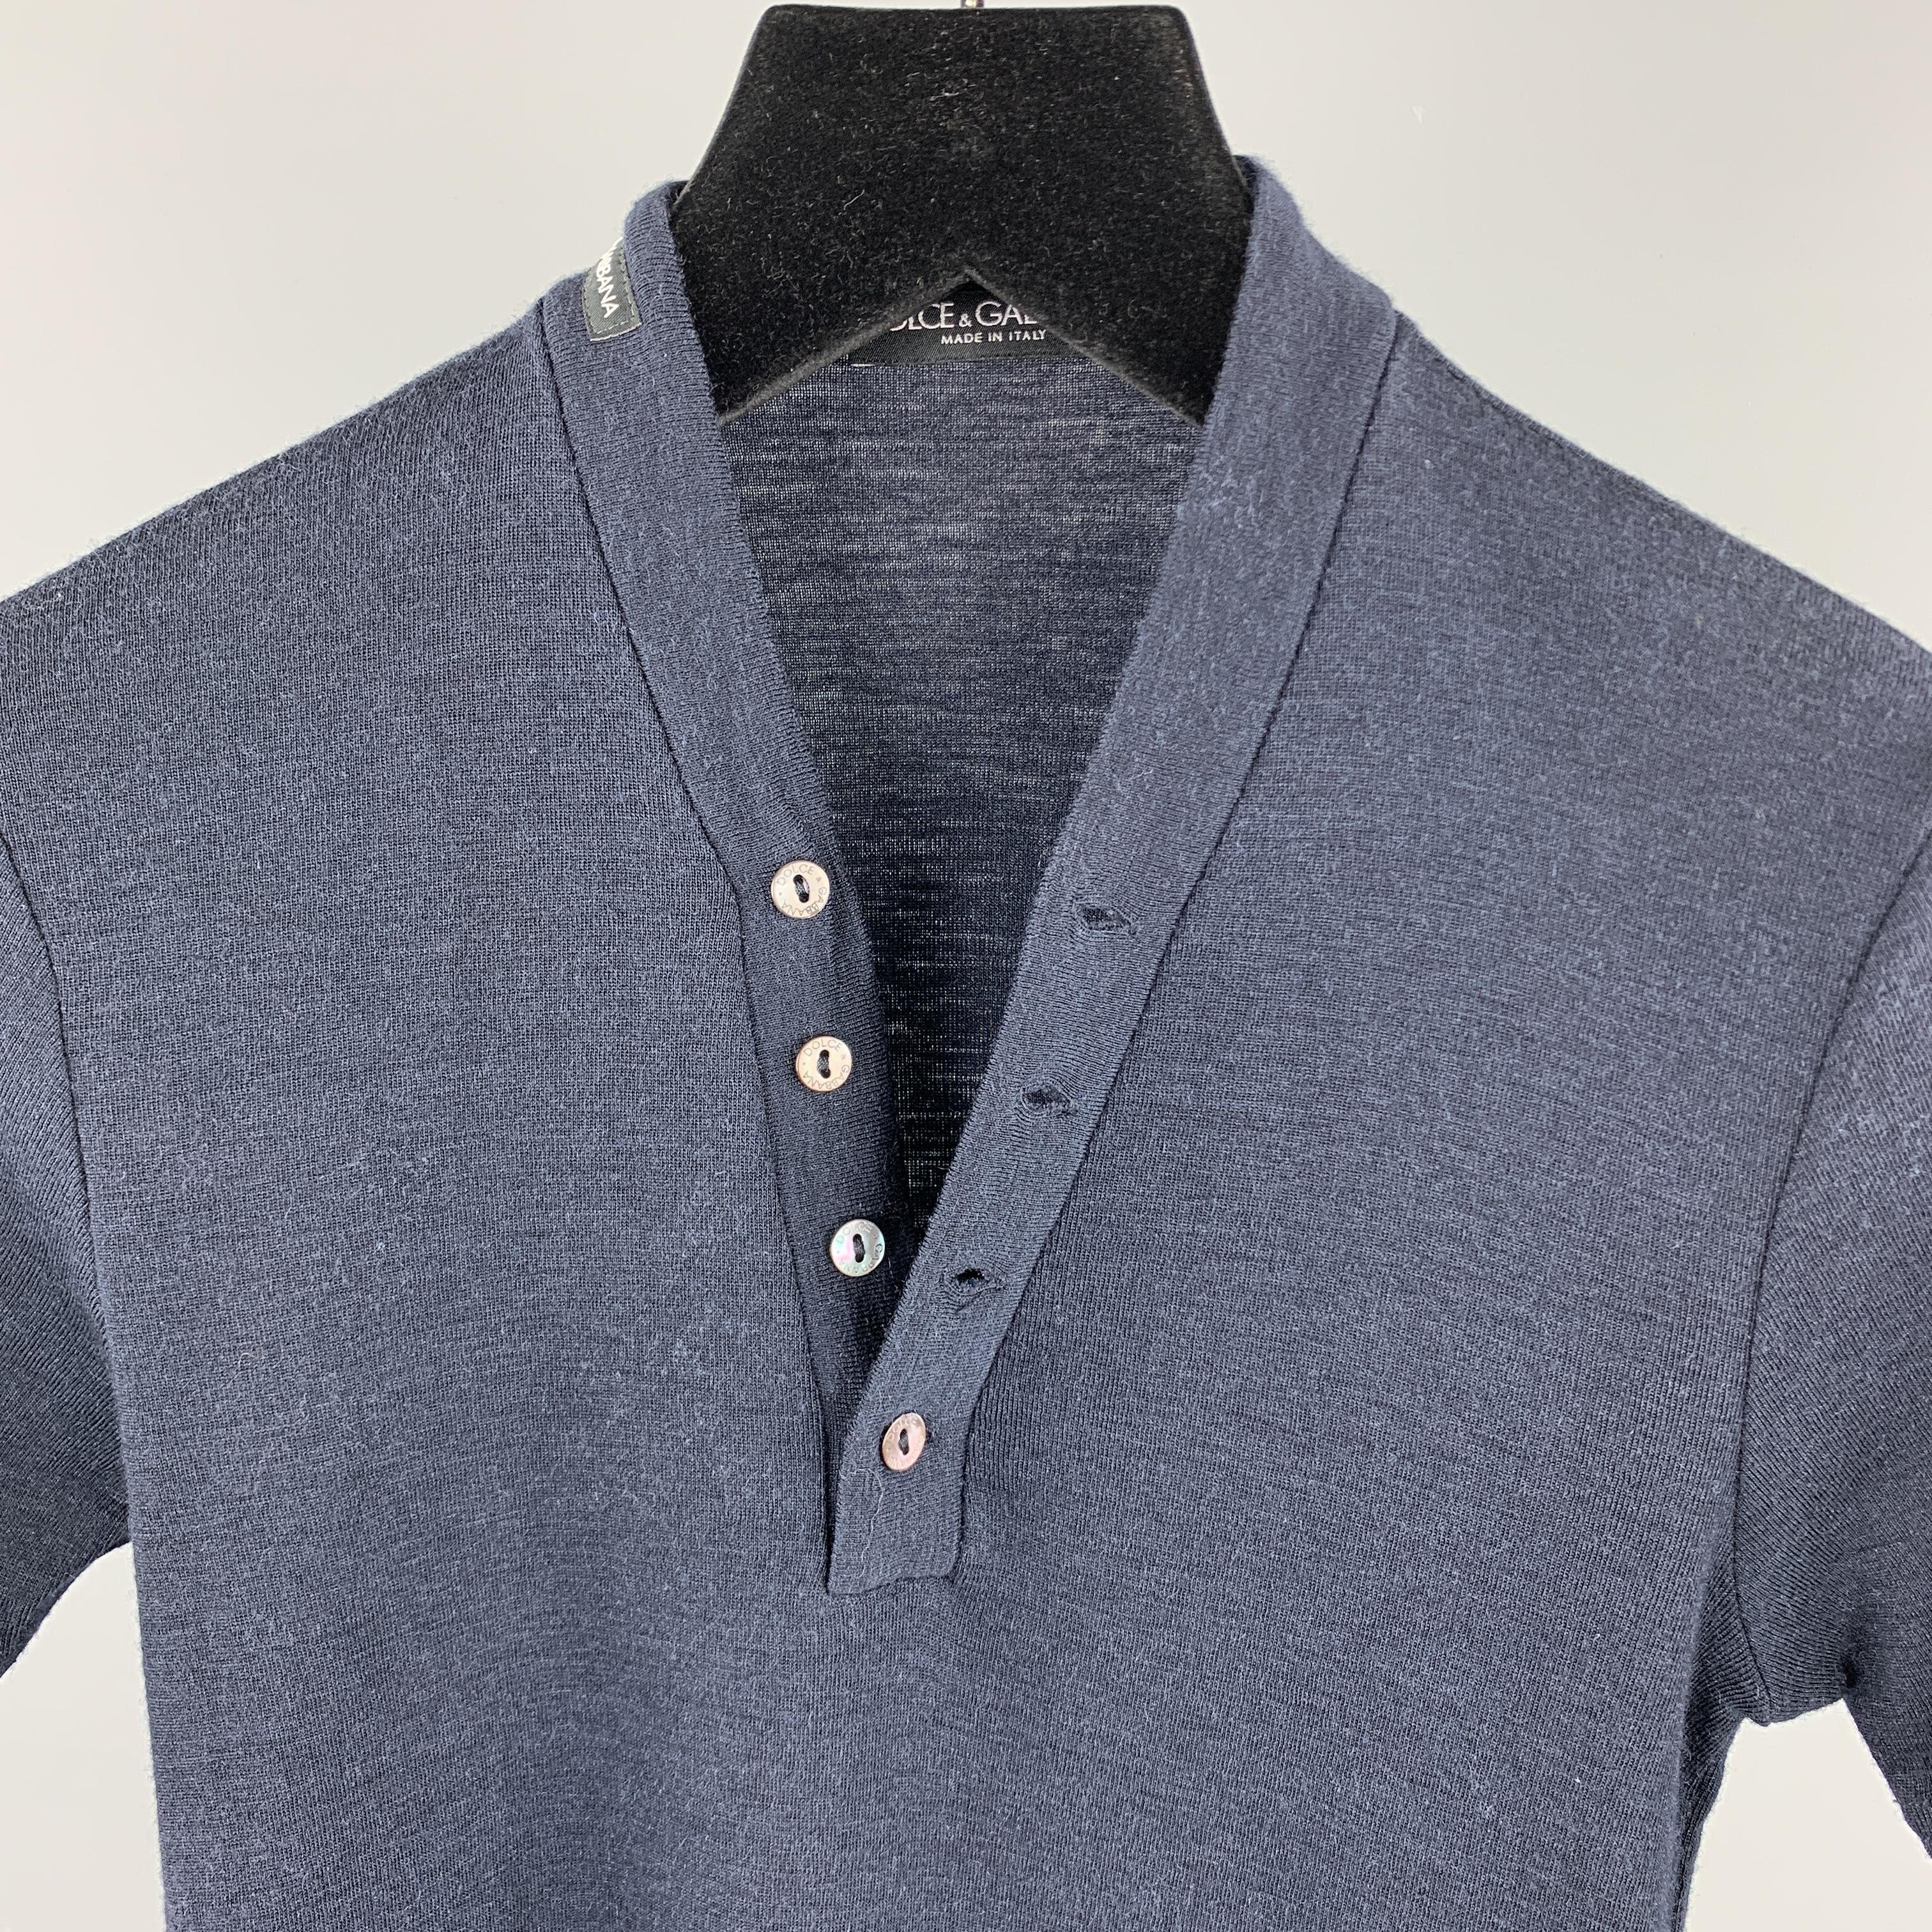 DOLCE & GABBANA henley pullover sweater comes in a solid navy wool / silk material, featuring four buttons at V-neck, short sleeves and a brand tag at shoulder. Made in Italy.

Excellent Pre-Owned Condition.
Marked: IT 46

Measurements:

Shoulder: